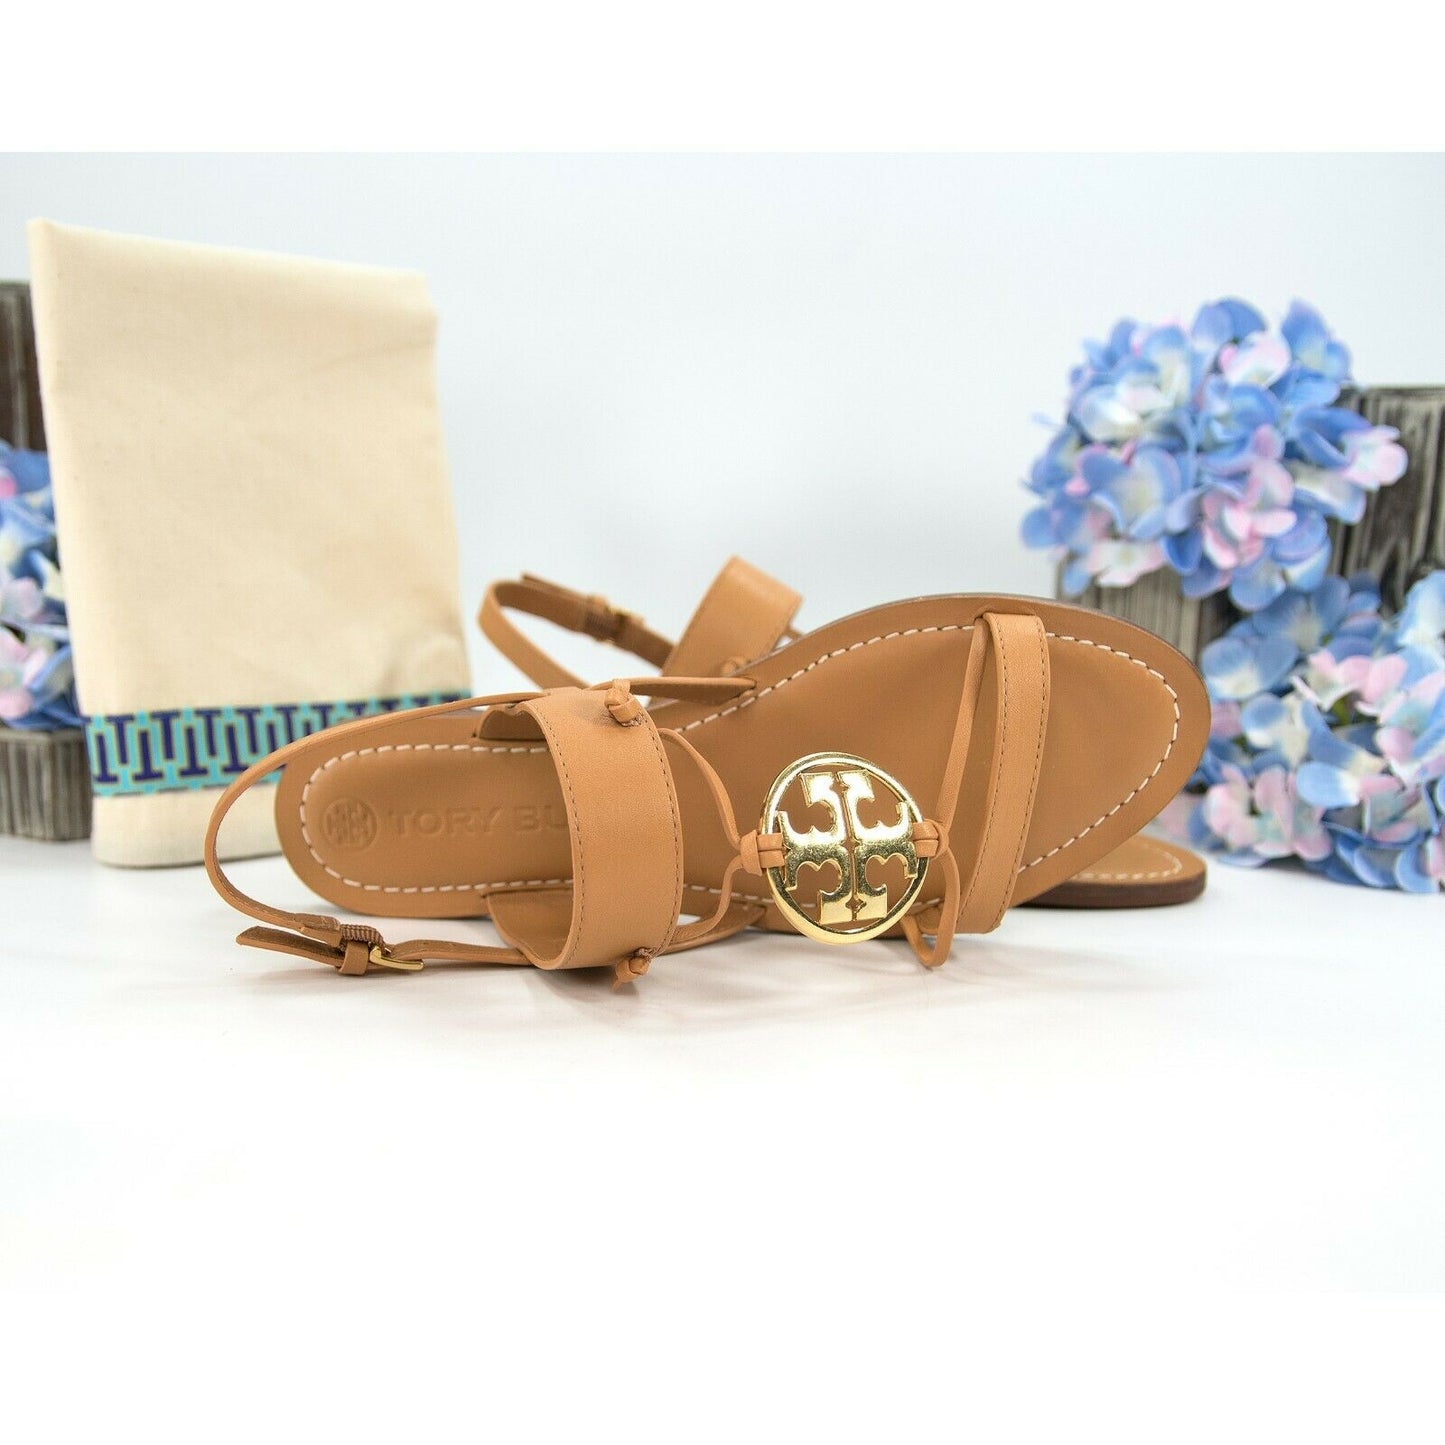 Tory Burch Camello Leather Miller Thong Sandals Size 6.5 NIB